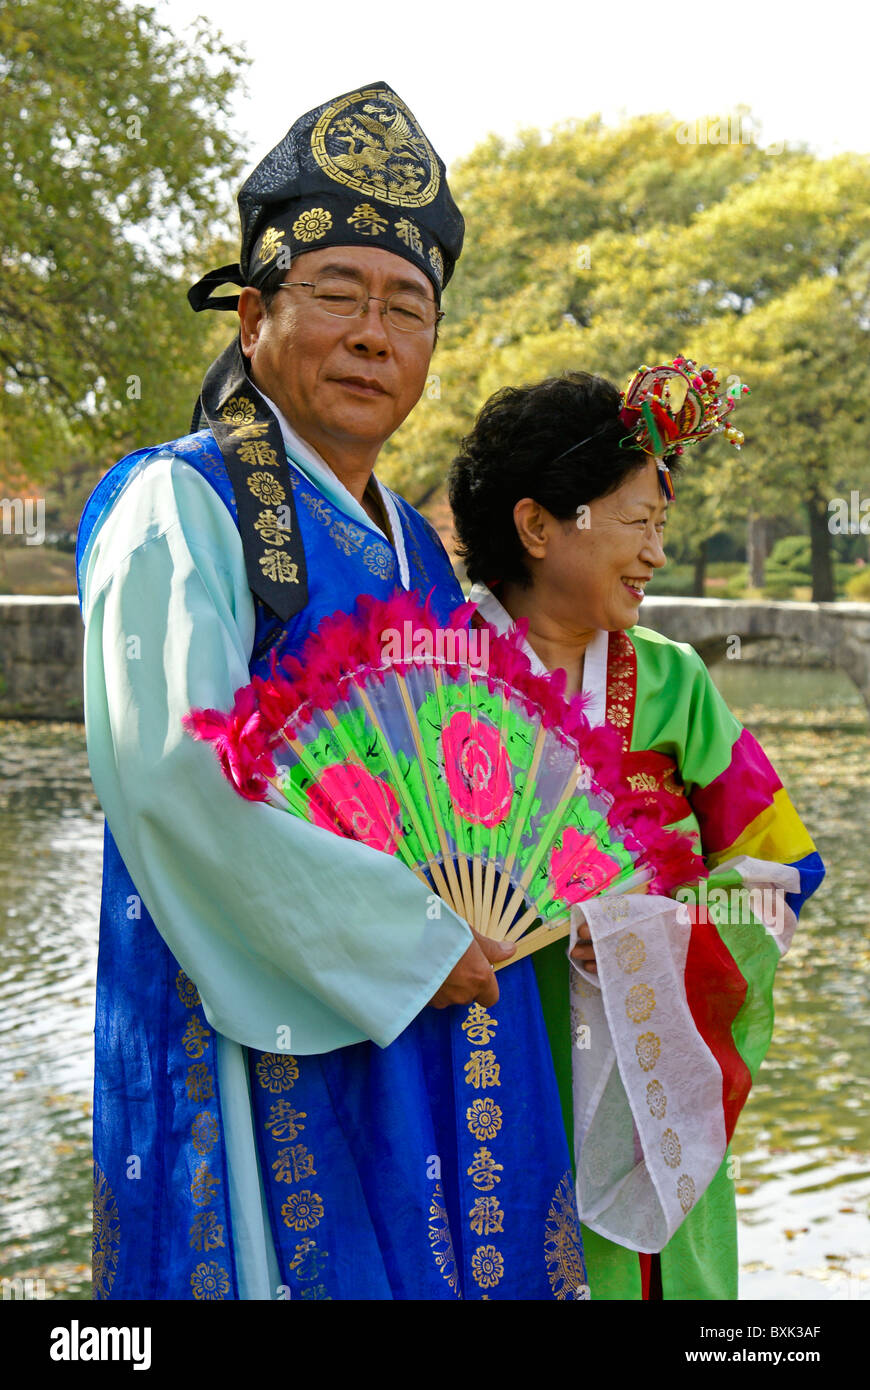 Korean man and woman in traditional dress, South Korea Stock Photo